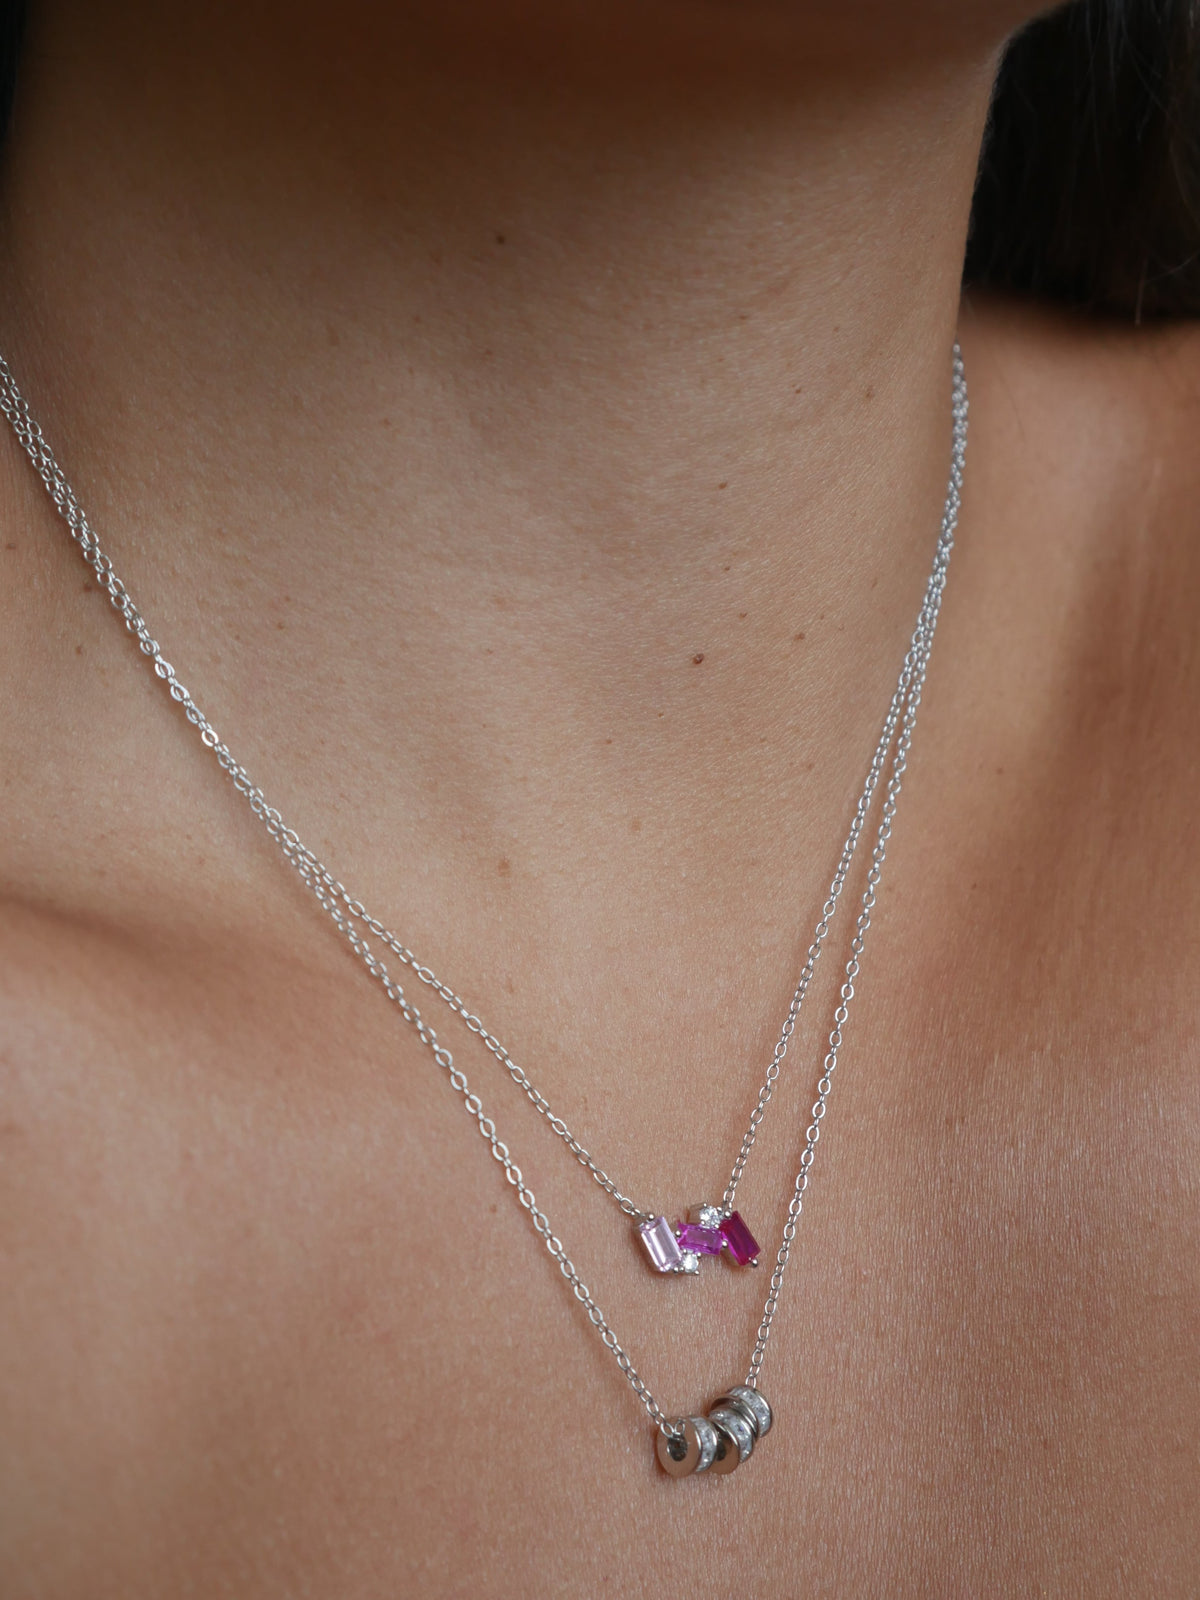 necklace, silver necklaces, 925 sterling silver necklaces, rhinestone necklaces, pink rhinestone necklaces, designer jewelry, fashion jewelry, birthday gifts, anniversary gifts, graduation gifts, holiday gifts, pink necklaces, pink diamond necklace, waterproof jewelry, hypoallergenic necklaces , dainty jewelry, affordable, jewelry cool necklaces, necklace ideas, tarnish free necklaces, nice necklace pink necklaces